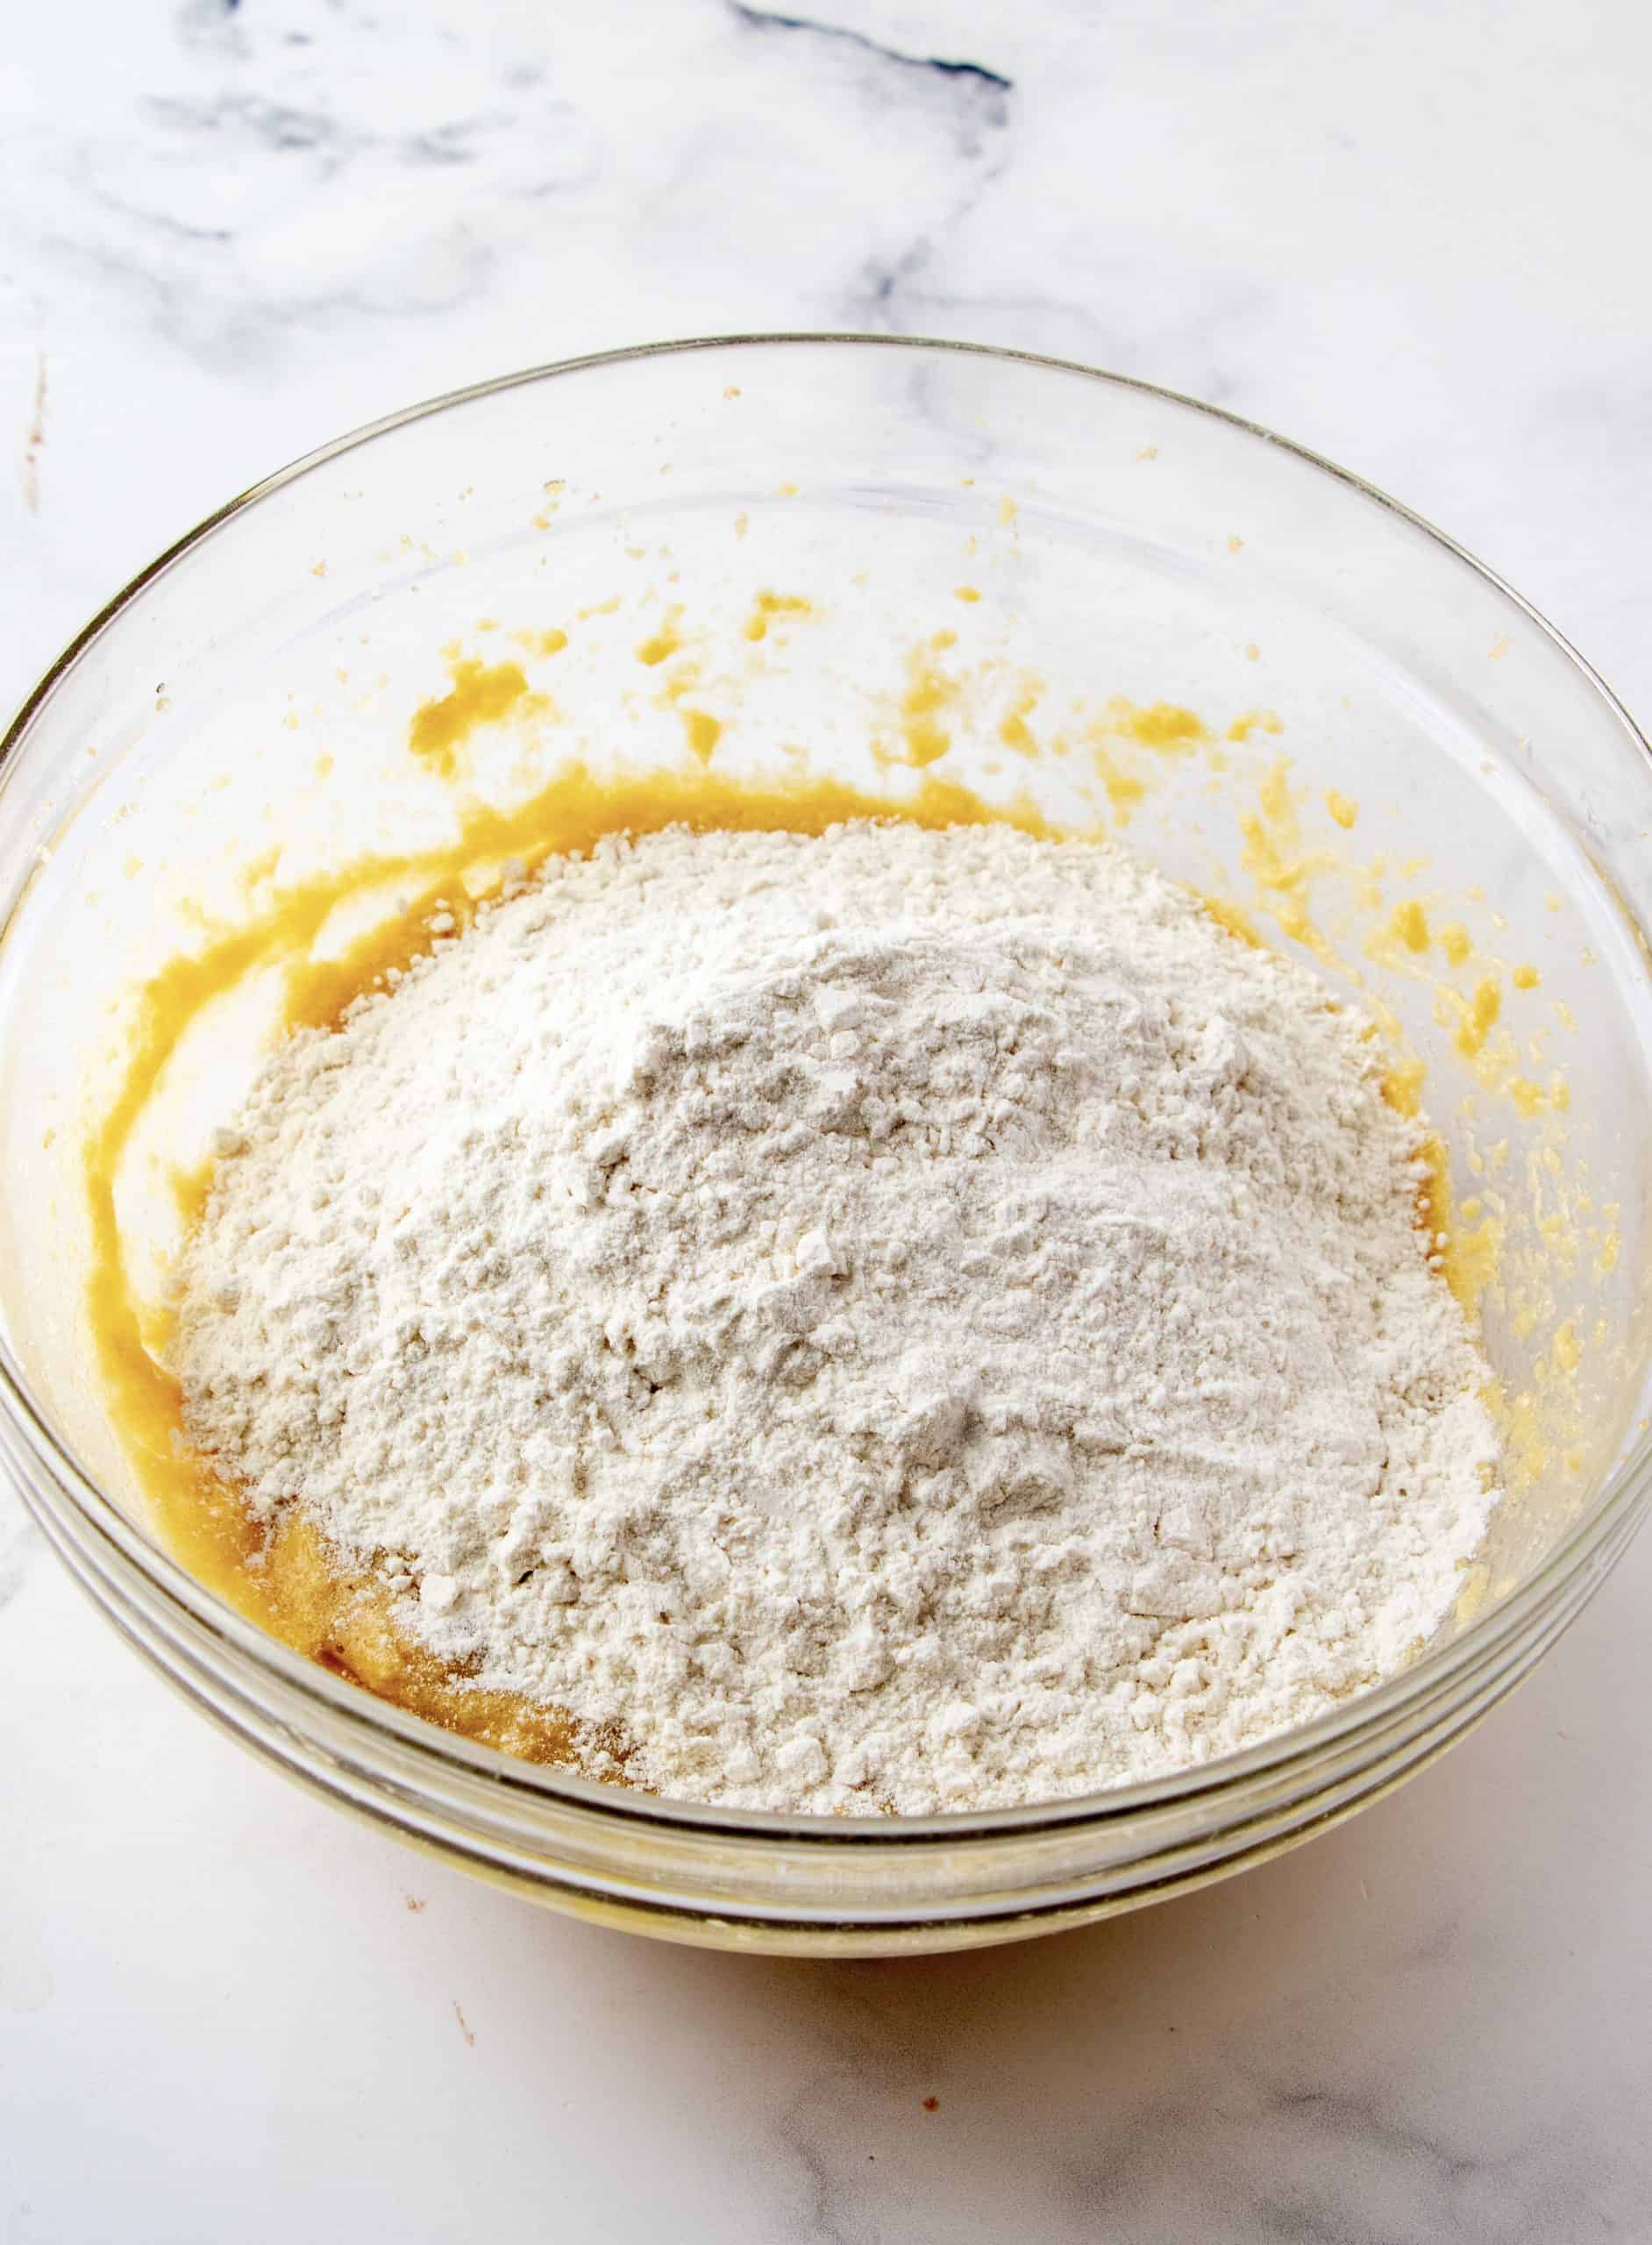 Flour adding egg and butter mixture in a bowl.